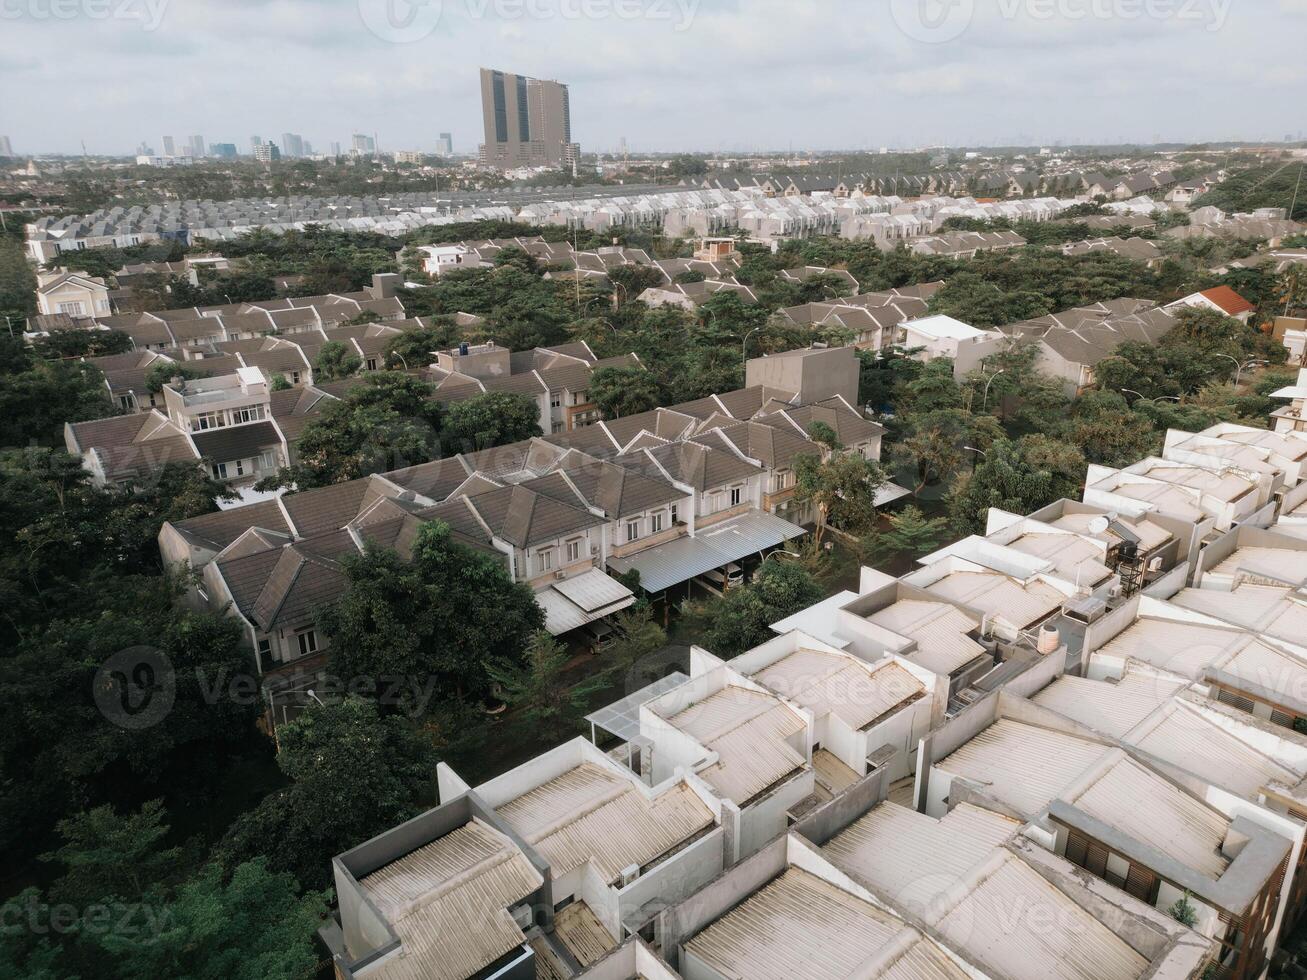 Aerial Perspective Residential Housing Roofs from Above, Roads Connecting Communities photo